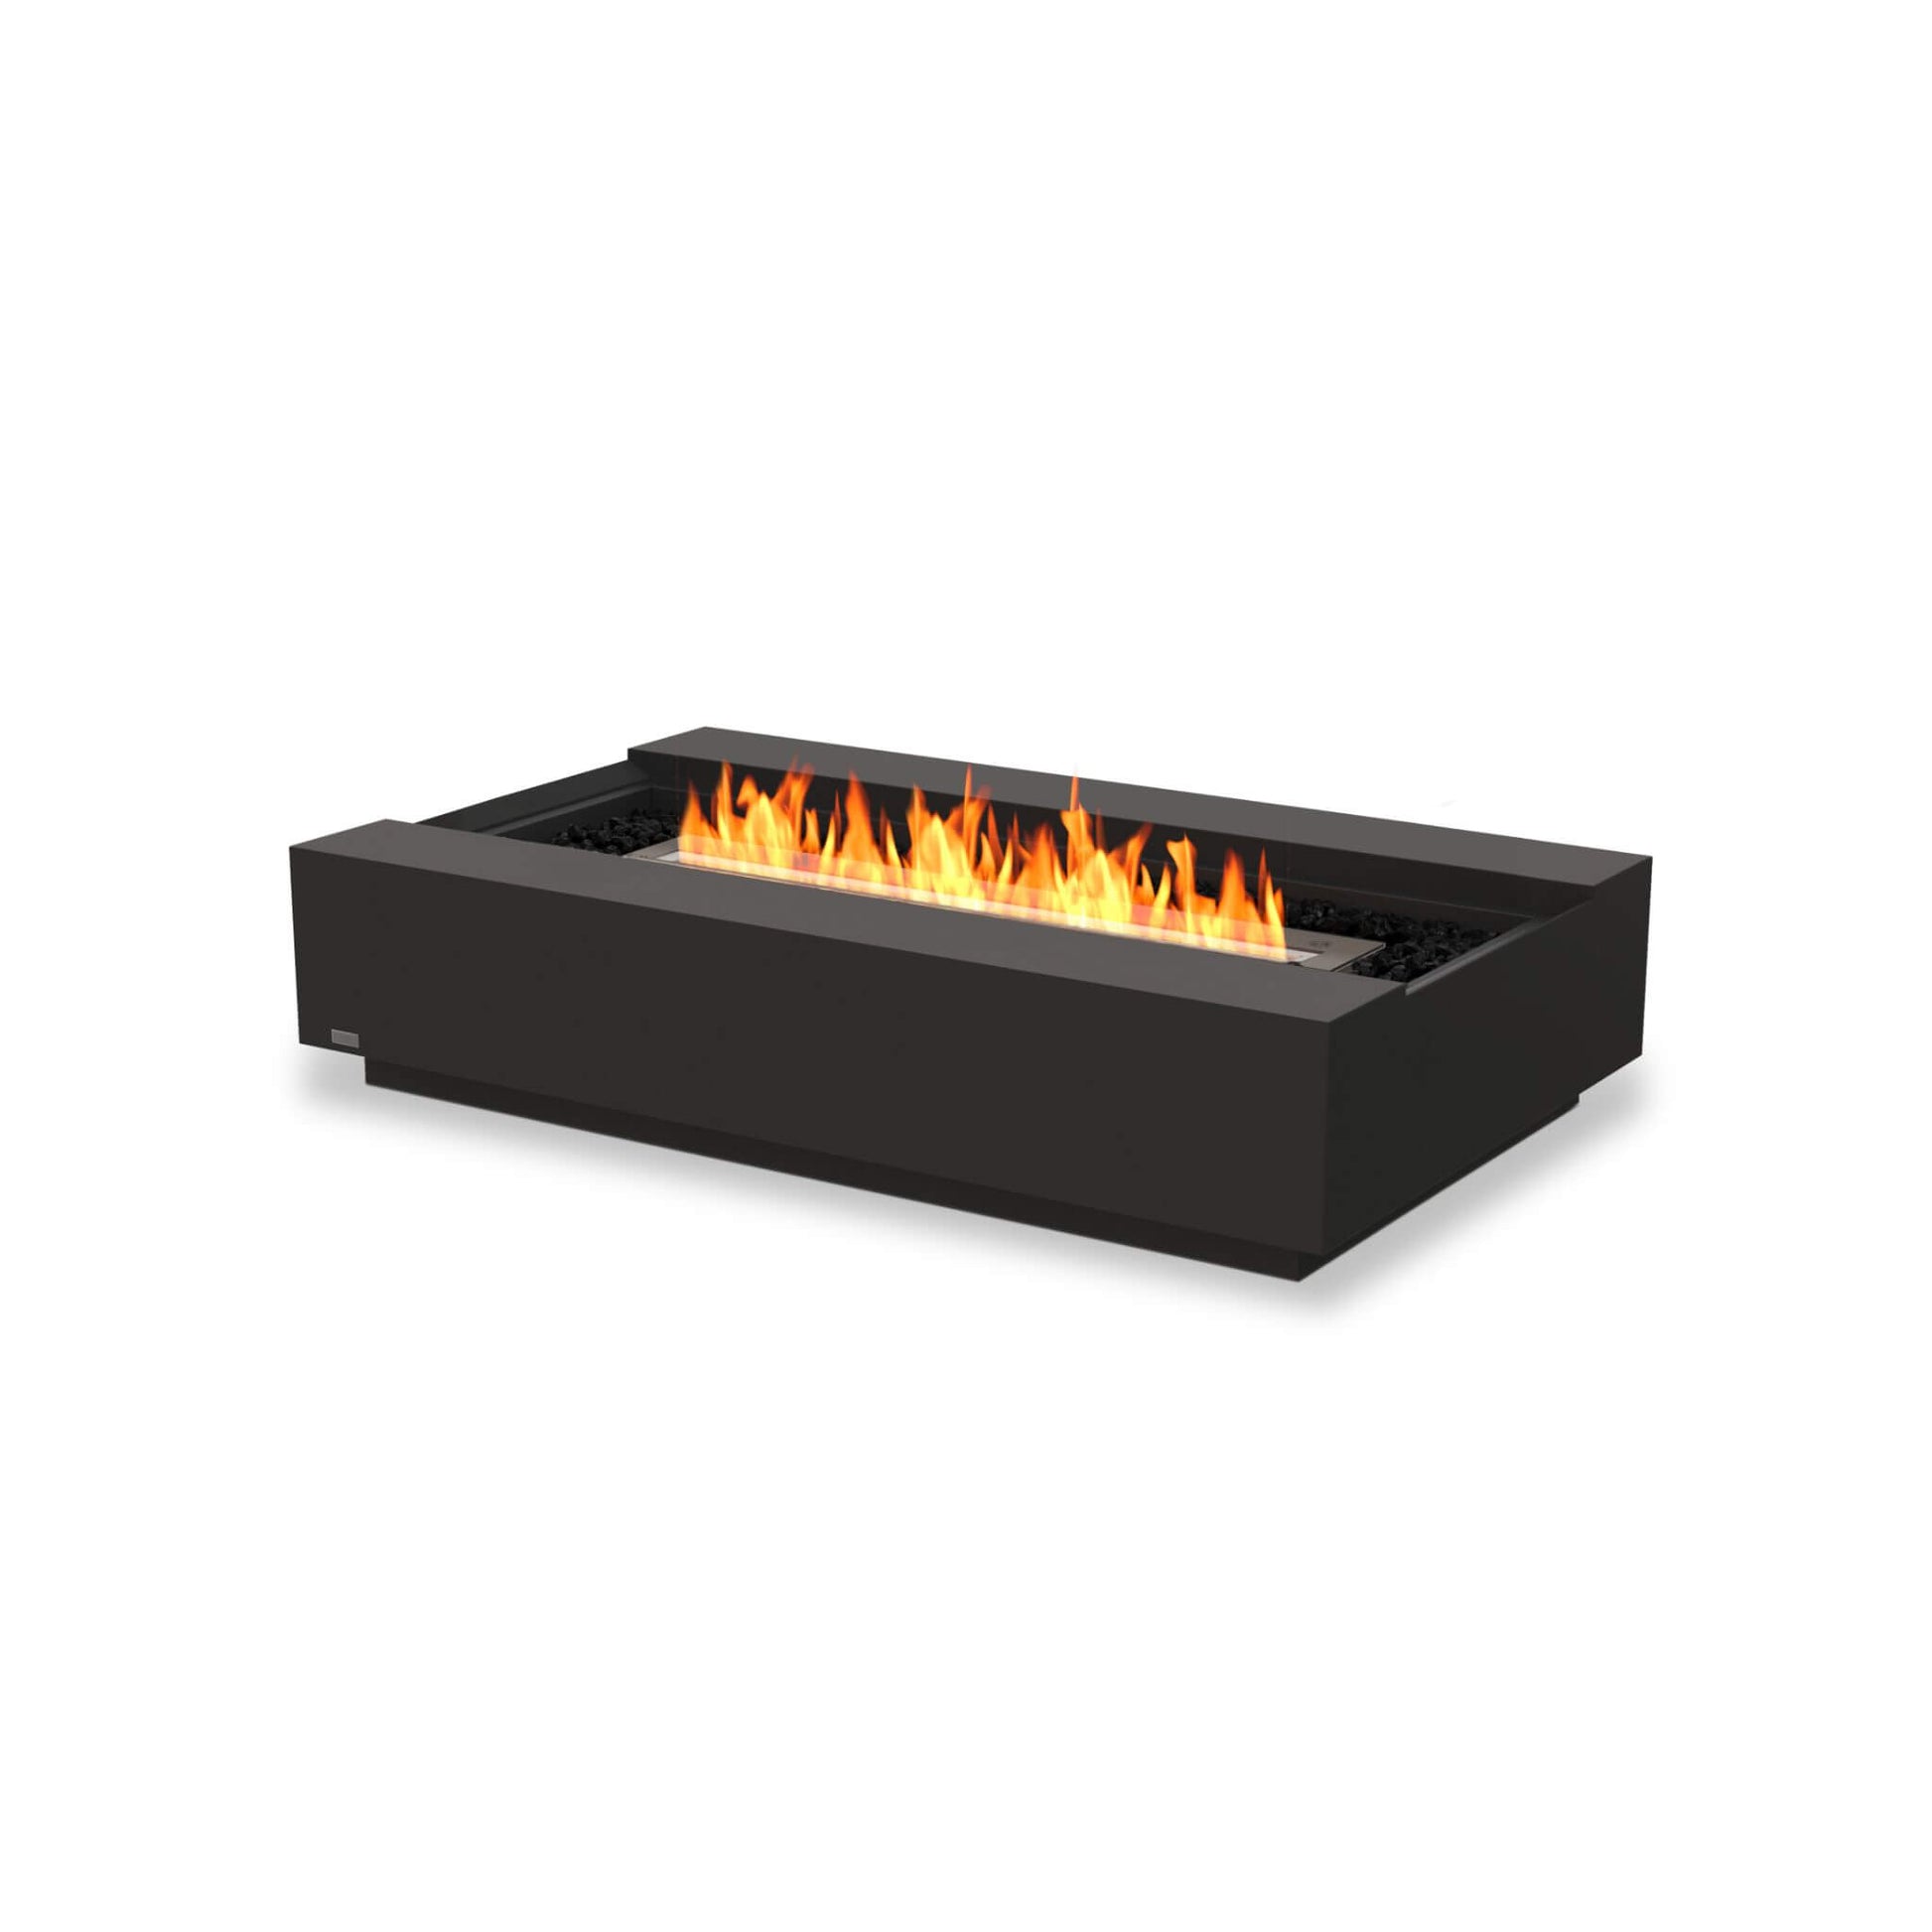 Cosmo 50 Linear Concrete Bio Ethanol Fire Pit Coffee Table with black steel burner in Graphite black for Indoor & Outdoor Heating by Ecosmart Fire